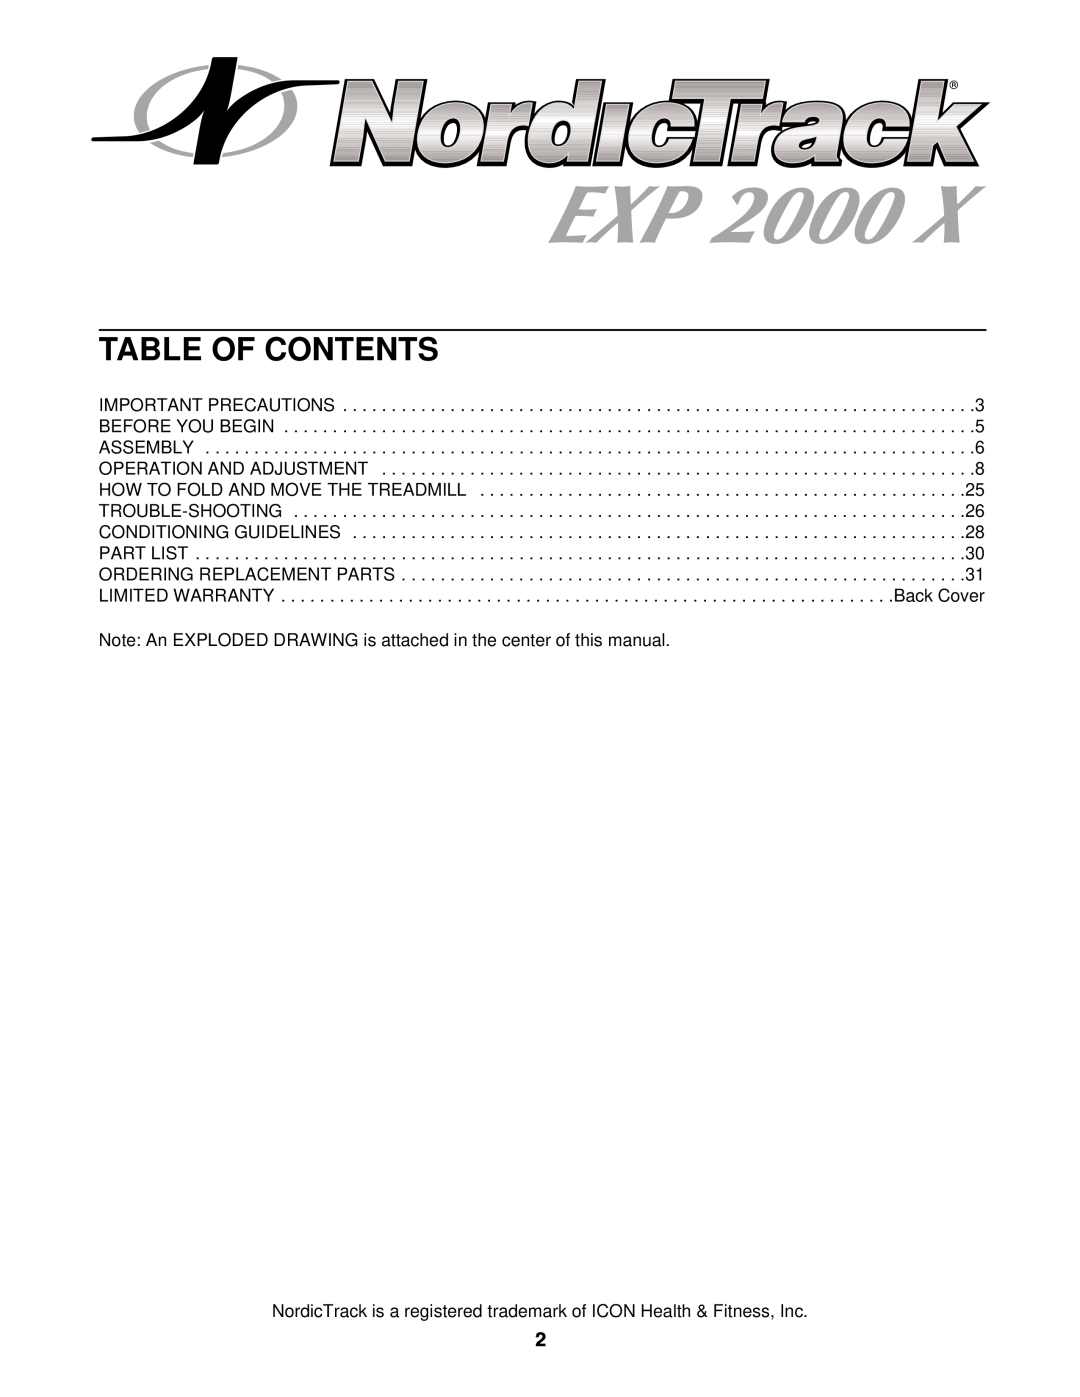 NordicTrack NTTL10510 user manual Table Of Contents, Note An EXPLODED DRAWING is attached in the center of this manual 